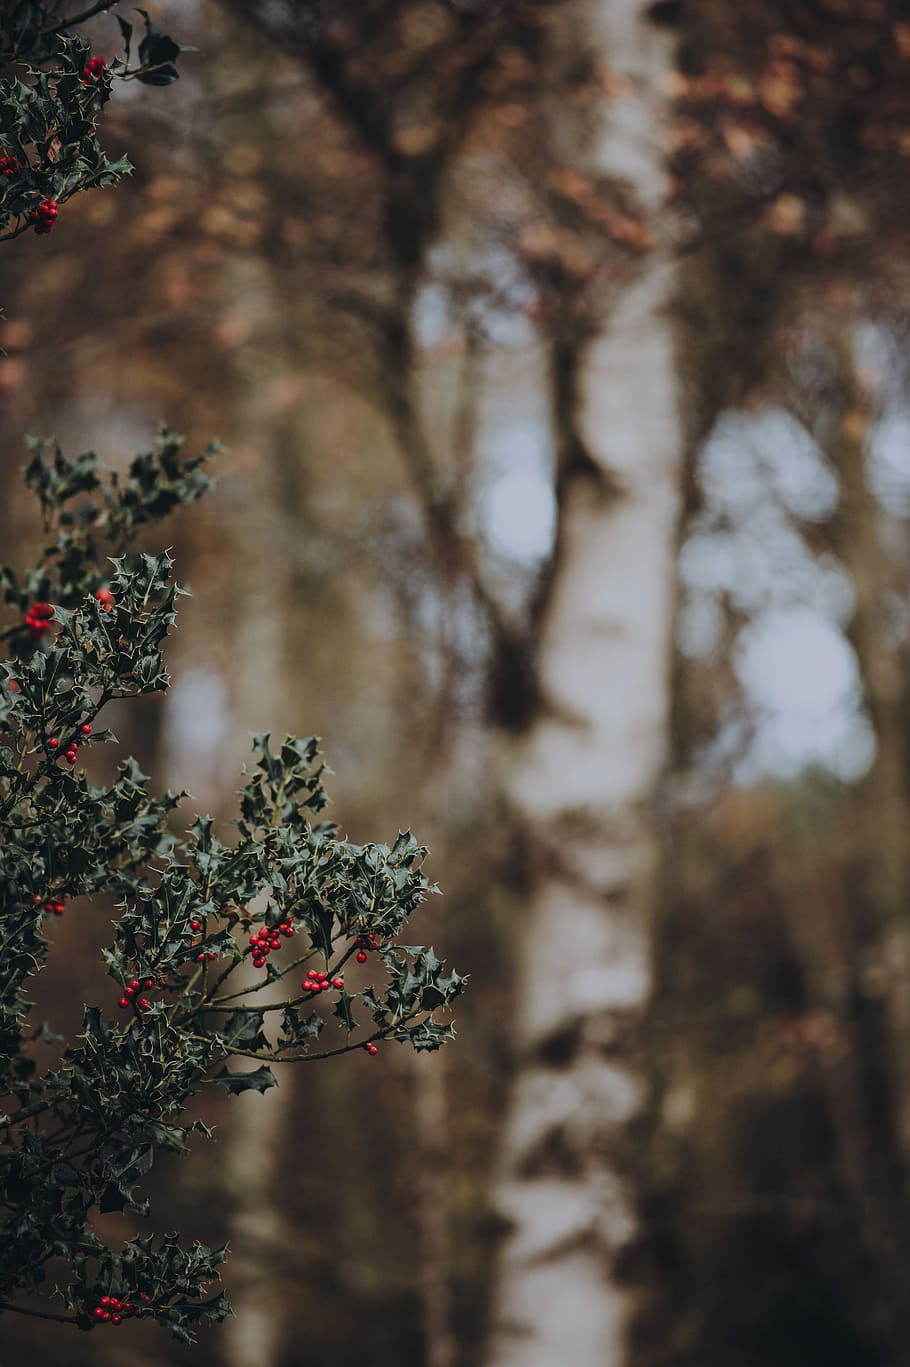 selective focus photography of green leafed plant with red cherry fruit, selective photography of mistletoe plant